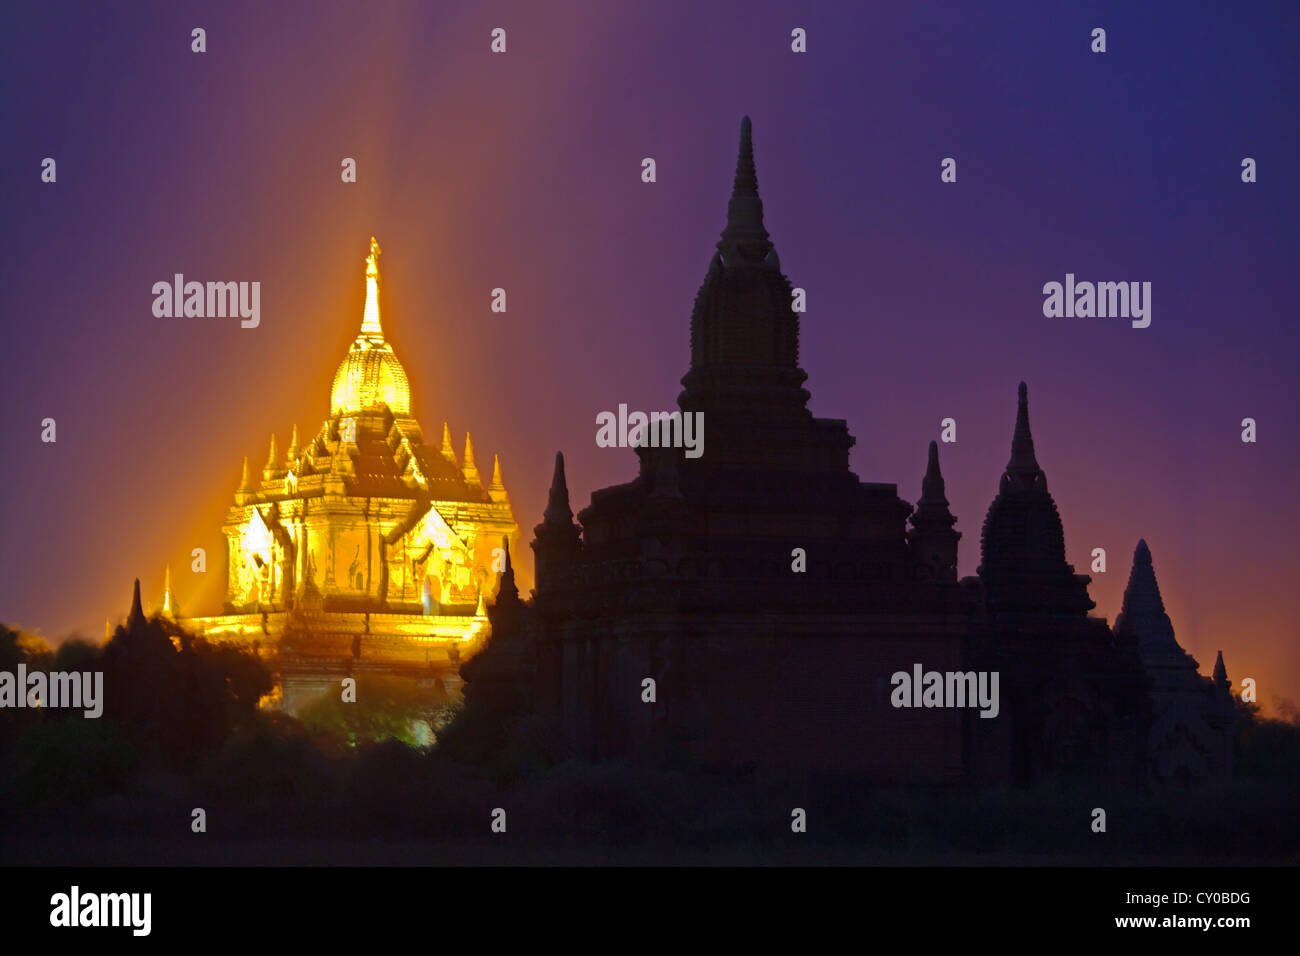 The ANANDA TEMPLE is lit like a jewel at night - BAGAN, MYANMAR Stock Photo